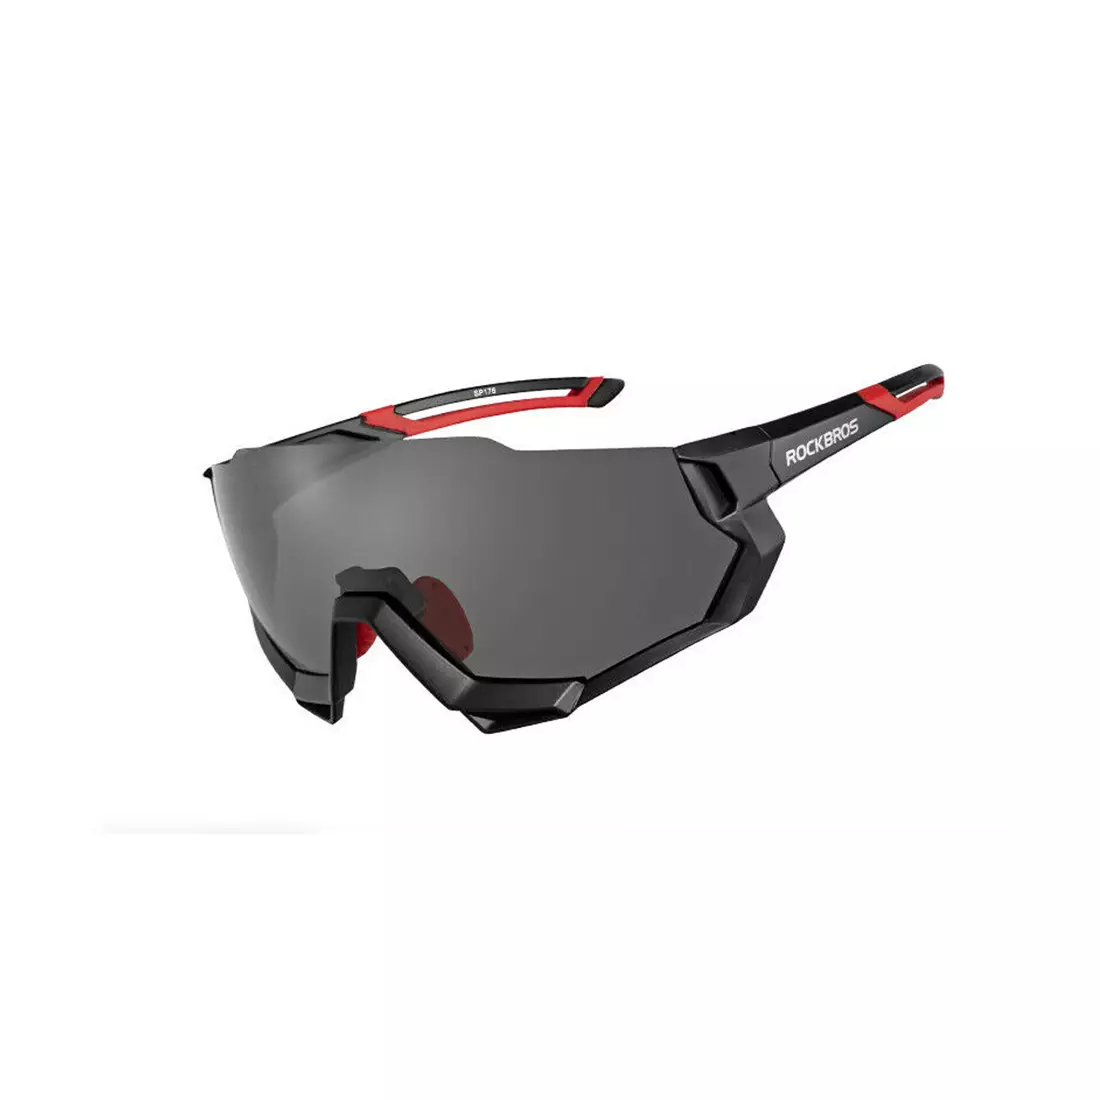 Rockbros 10131 bicycle/sports glasses with polarized 5 interchangeable lenses black